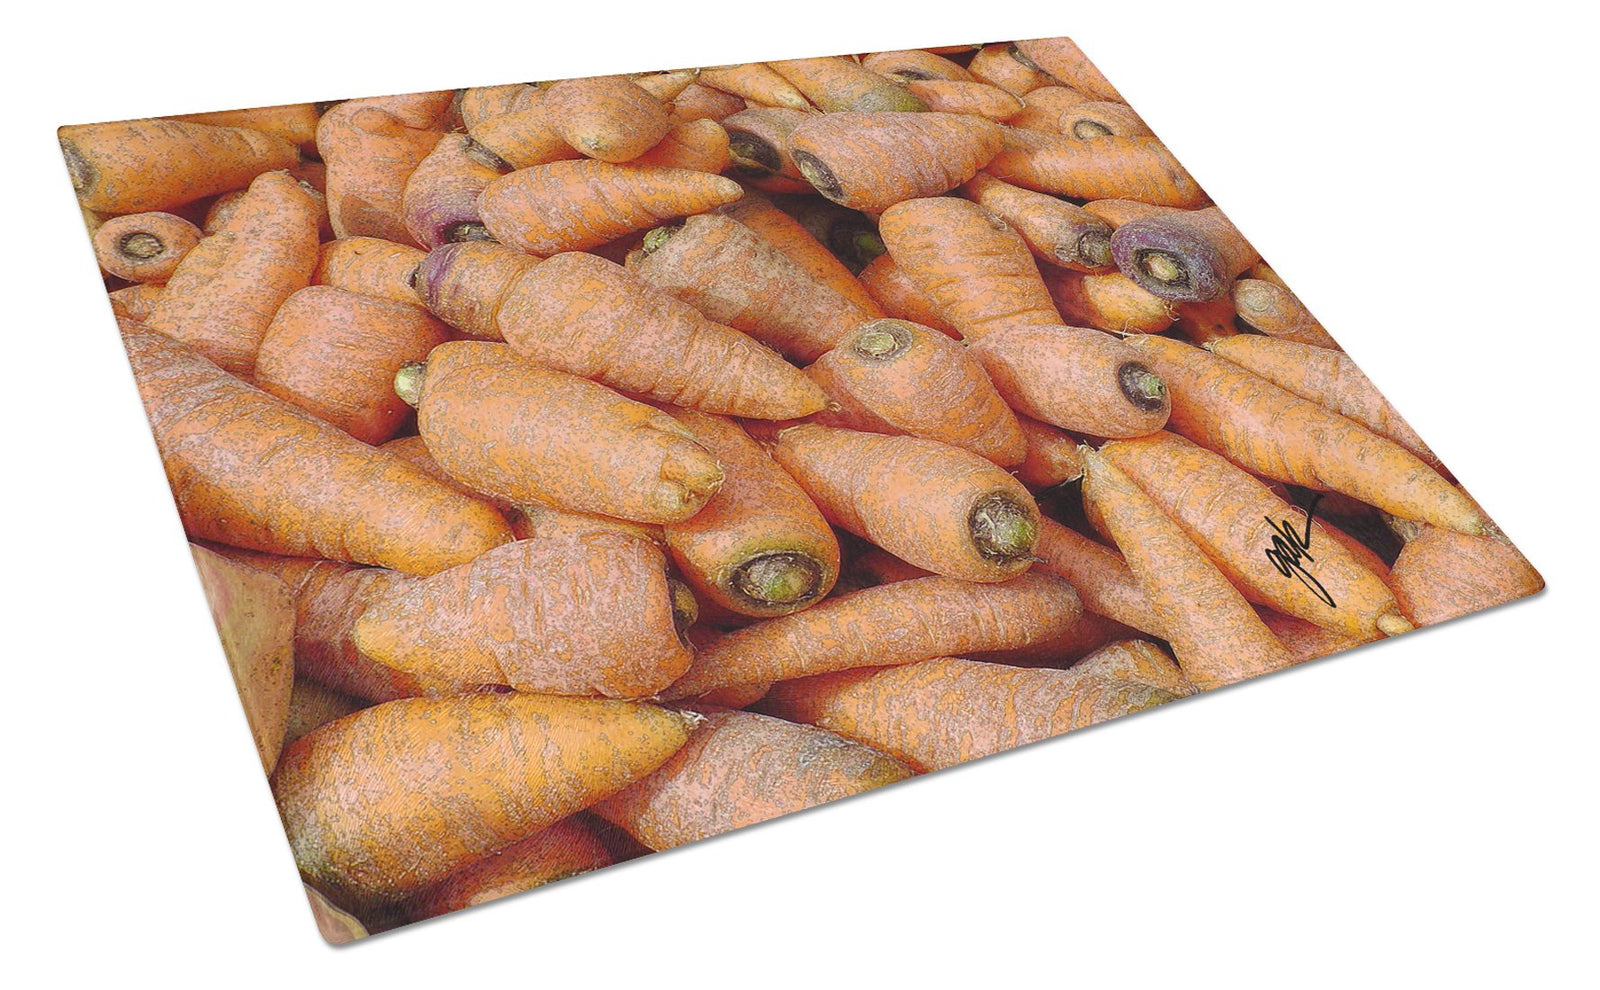 Buy this Carrots by Gary Kwiatek Glass Cutting Board Large